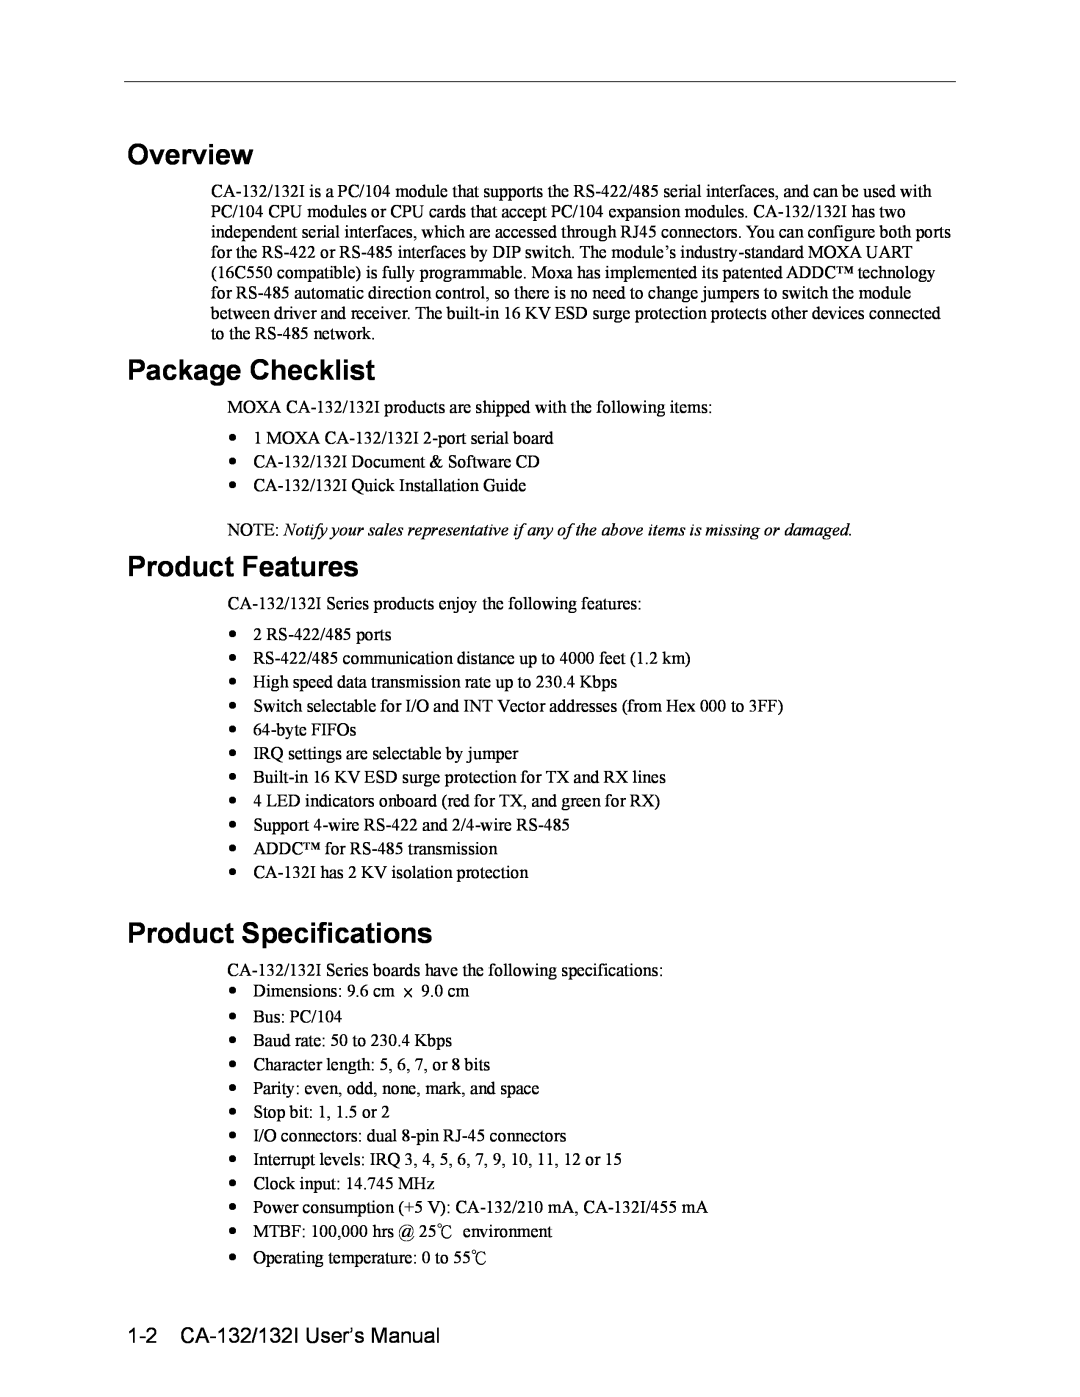 Moxa Technologies CA-132/132I user manual Overview, Package Checklist, Product Features, Product Specifications 